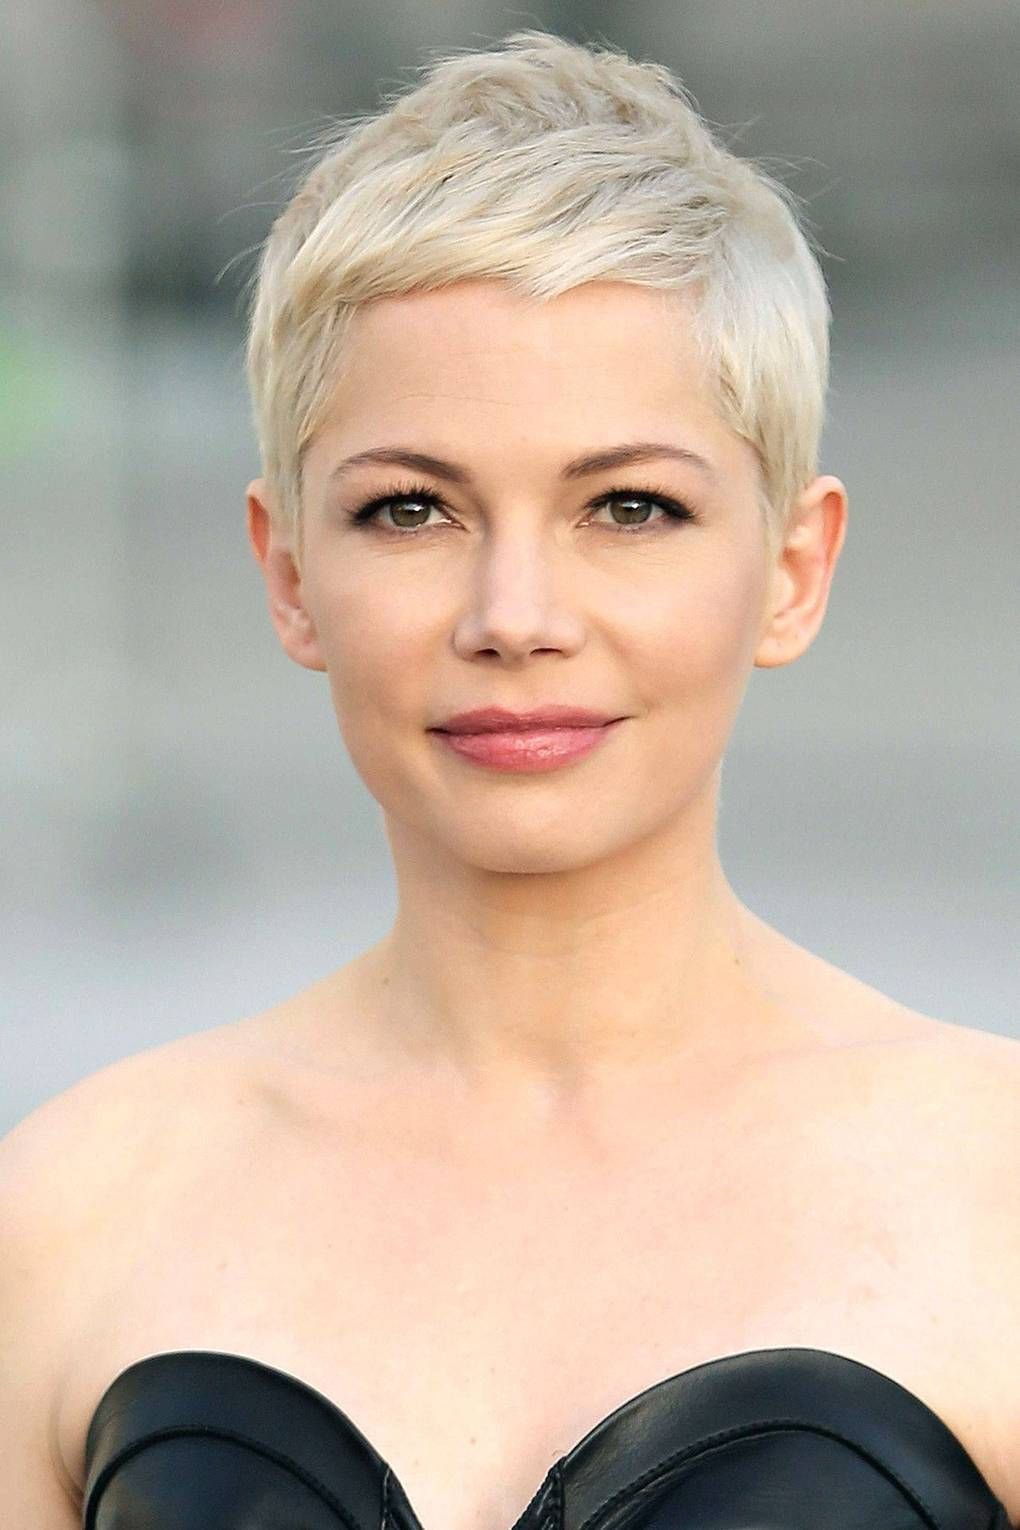 30 Types of Pixie Haircuts for Round Face 6e0225b7a7be2b6256eeb78d5cf762fc